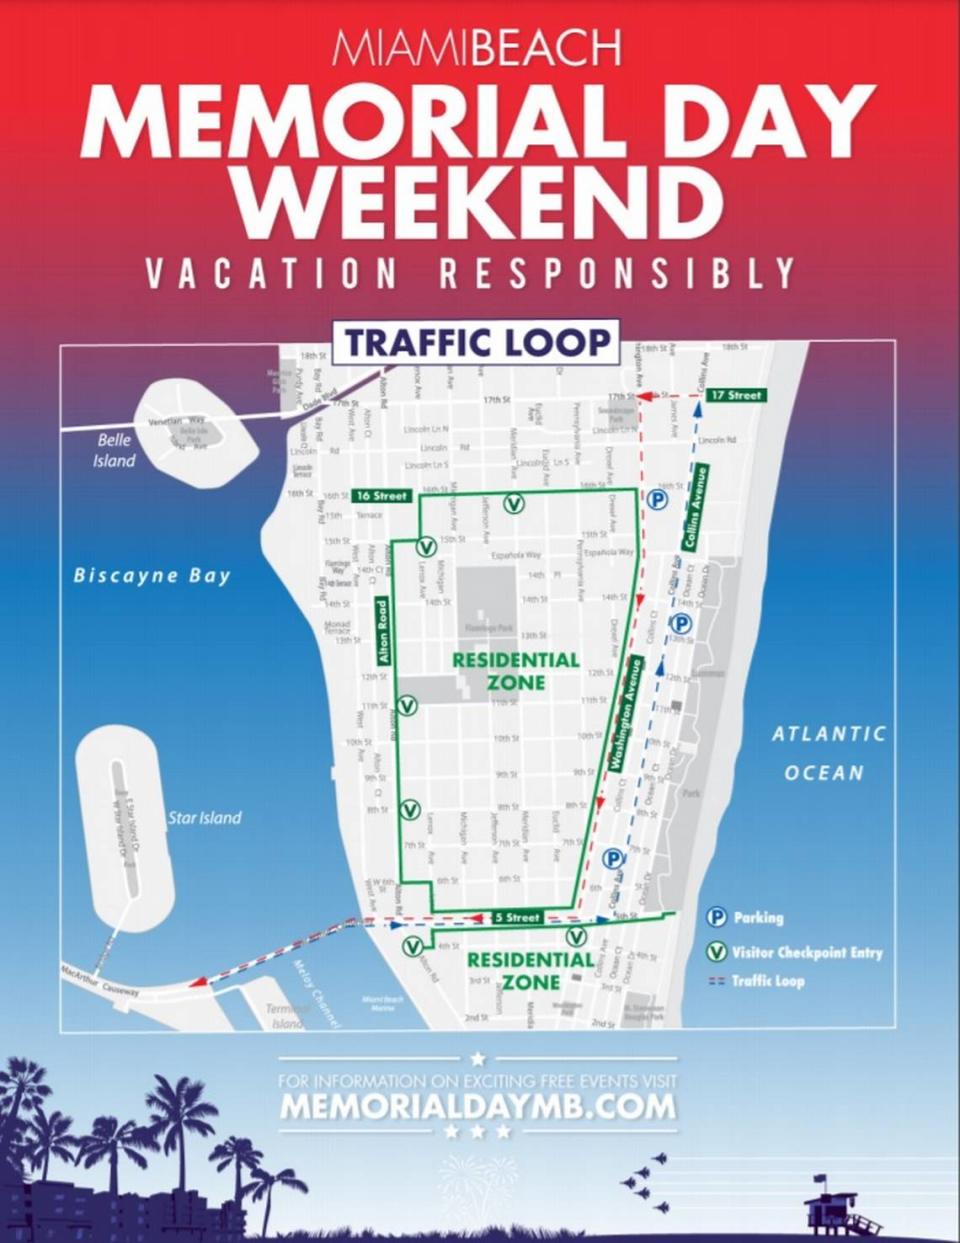 A traffic loop will be in place during Memorial Day Weekend in South Beach.